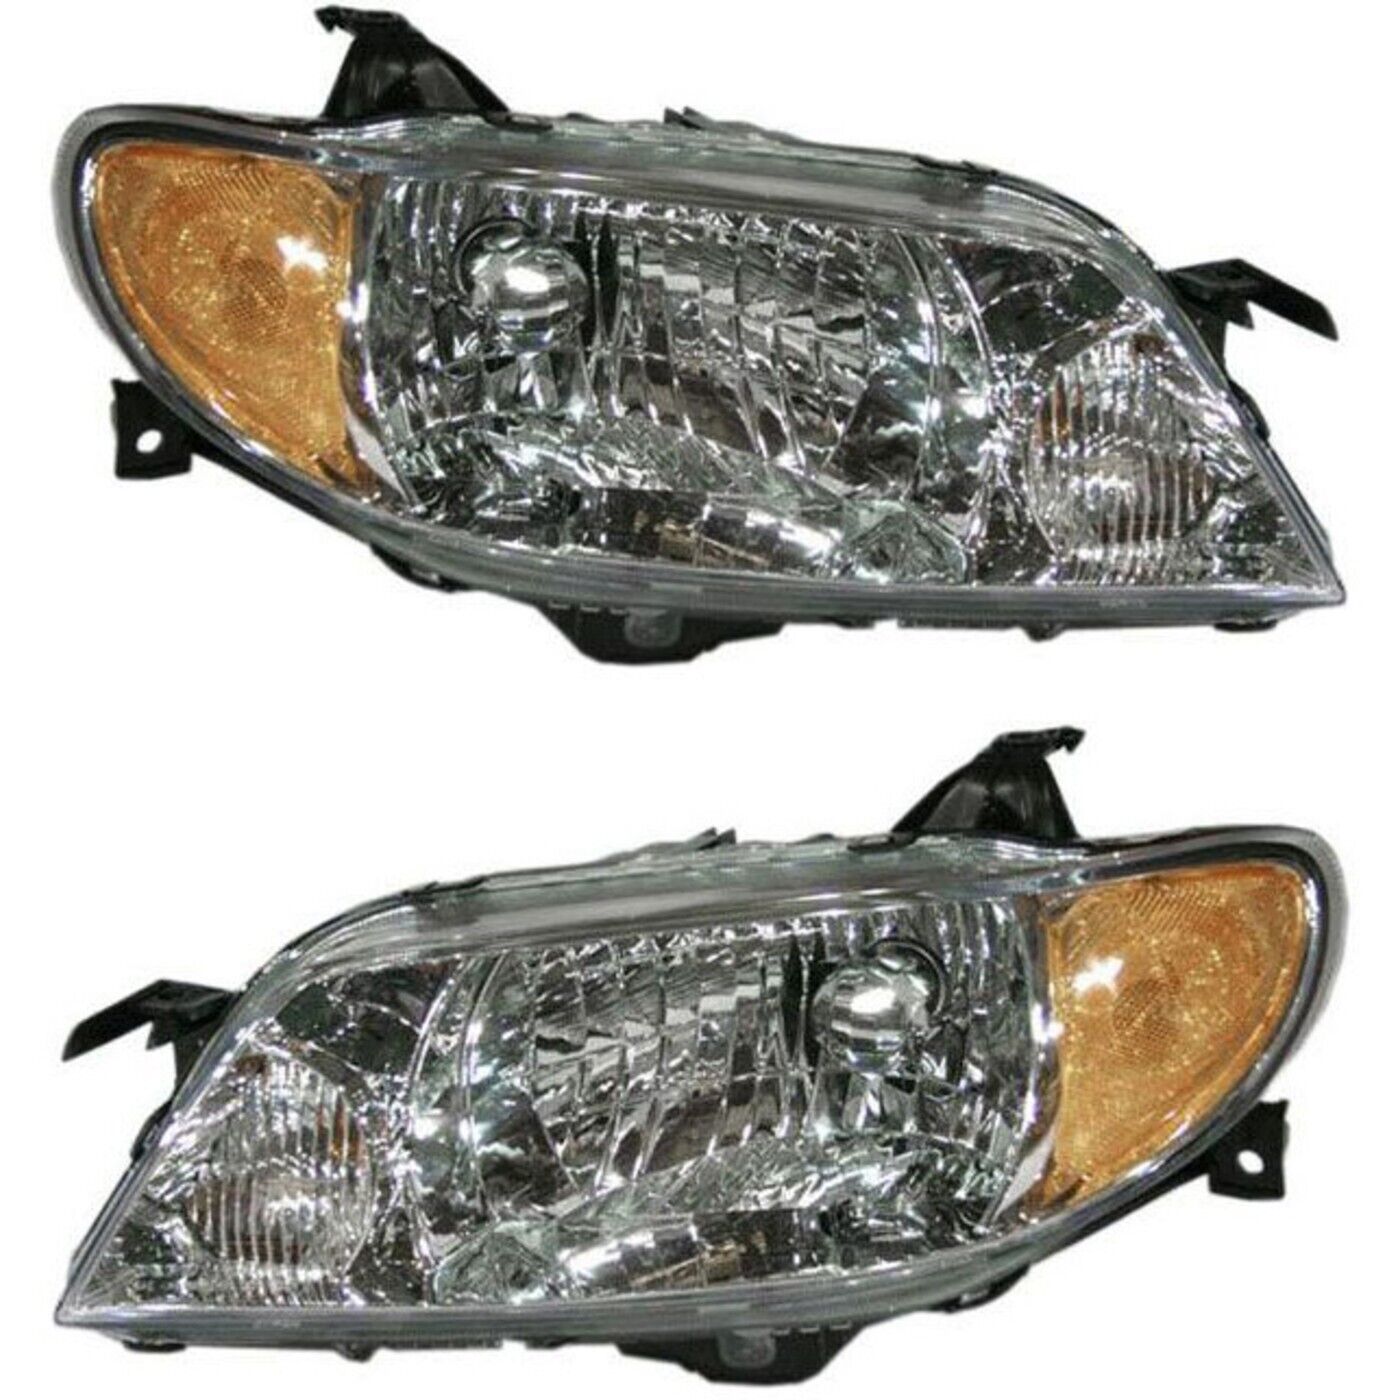 Headlight Set For 2001-2003 Mazda Protege Left and Right With Aluminum Bezel 2Pc